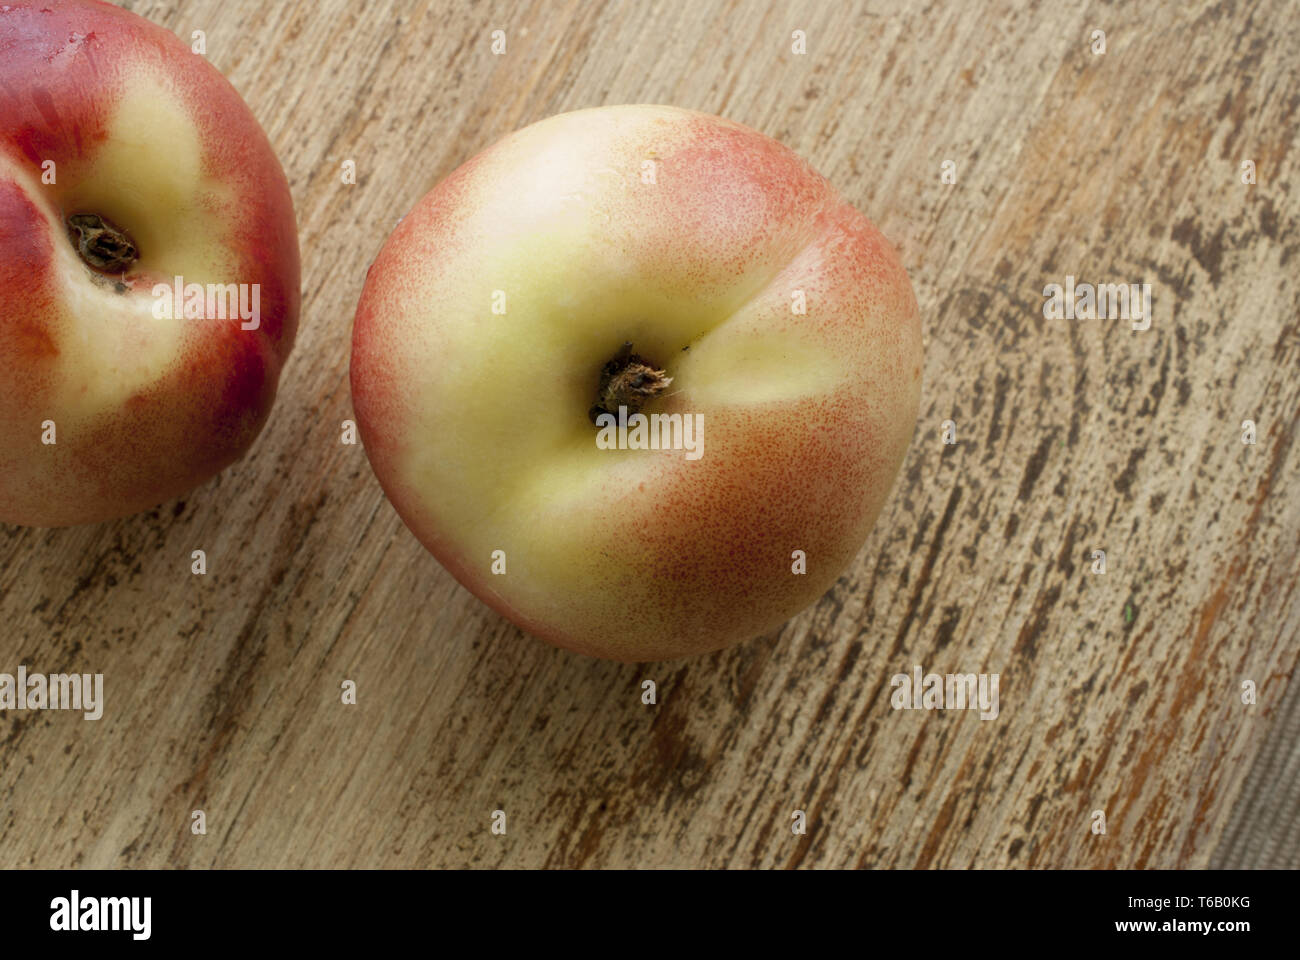 Peaches lie on weathered wooden surface Stock Photo